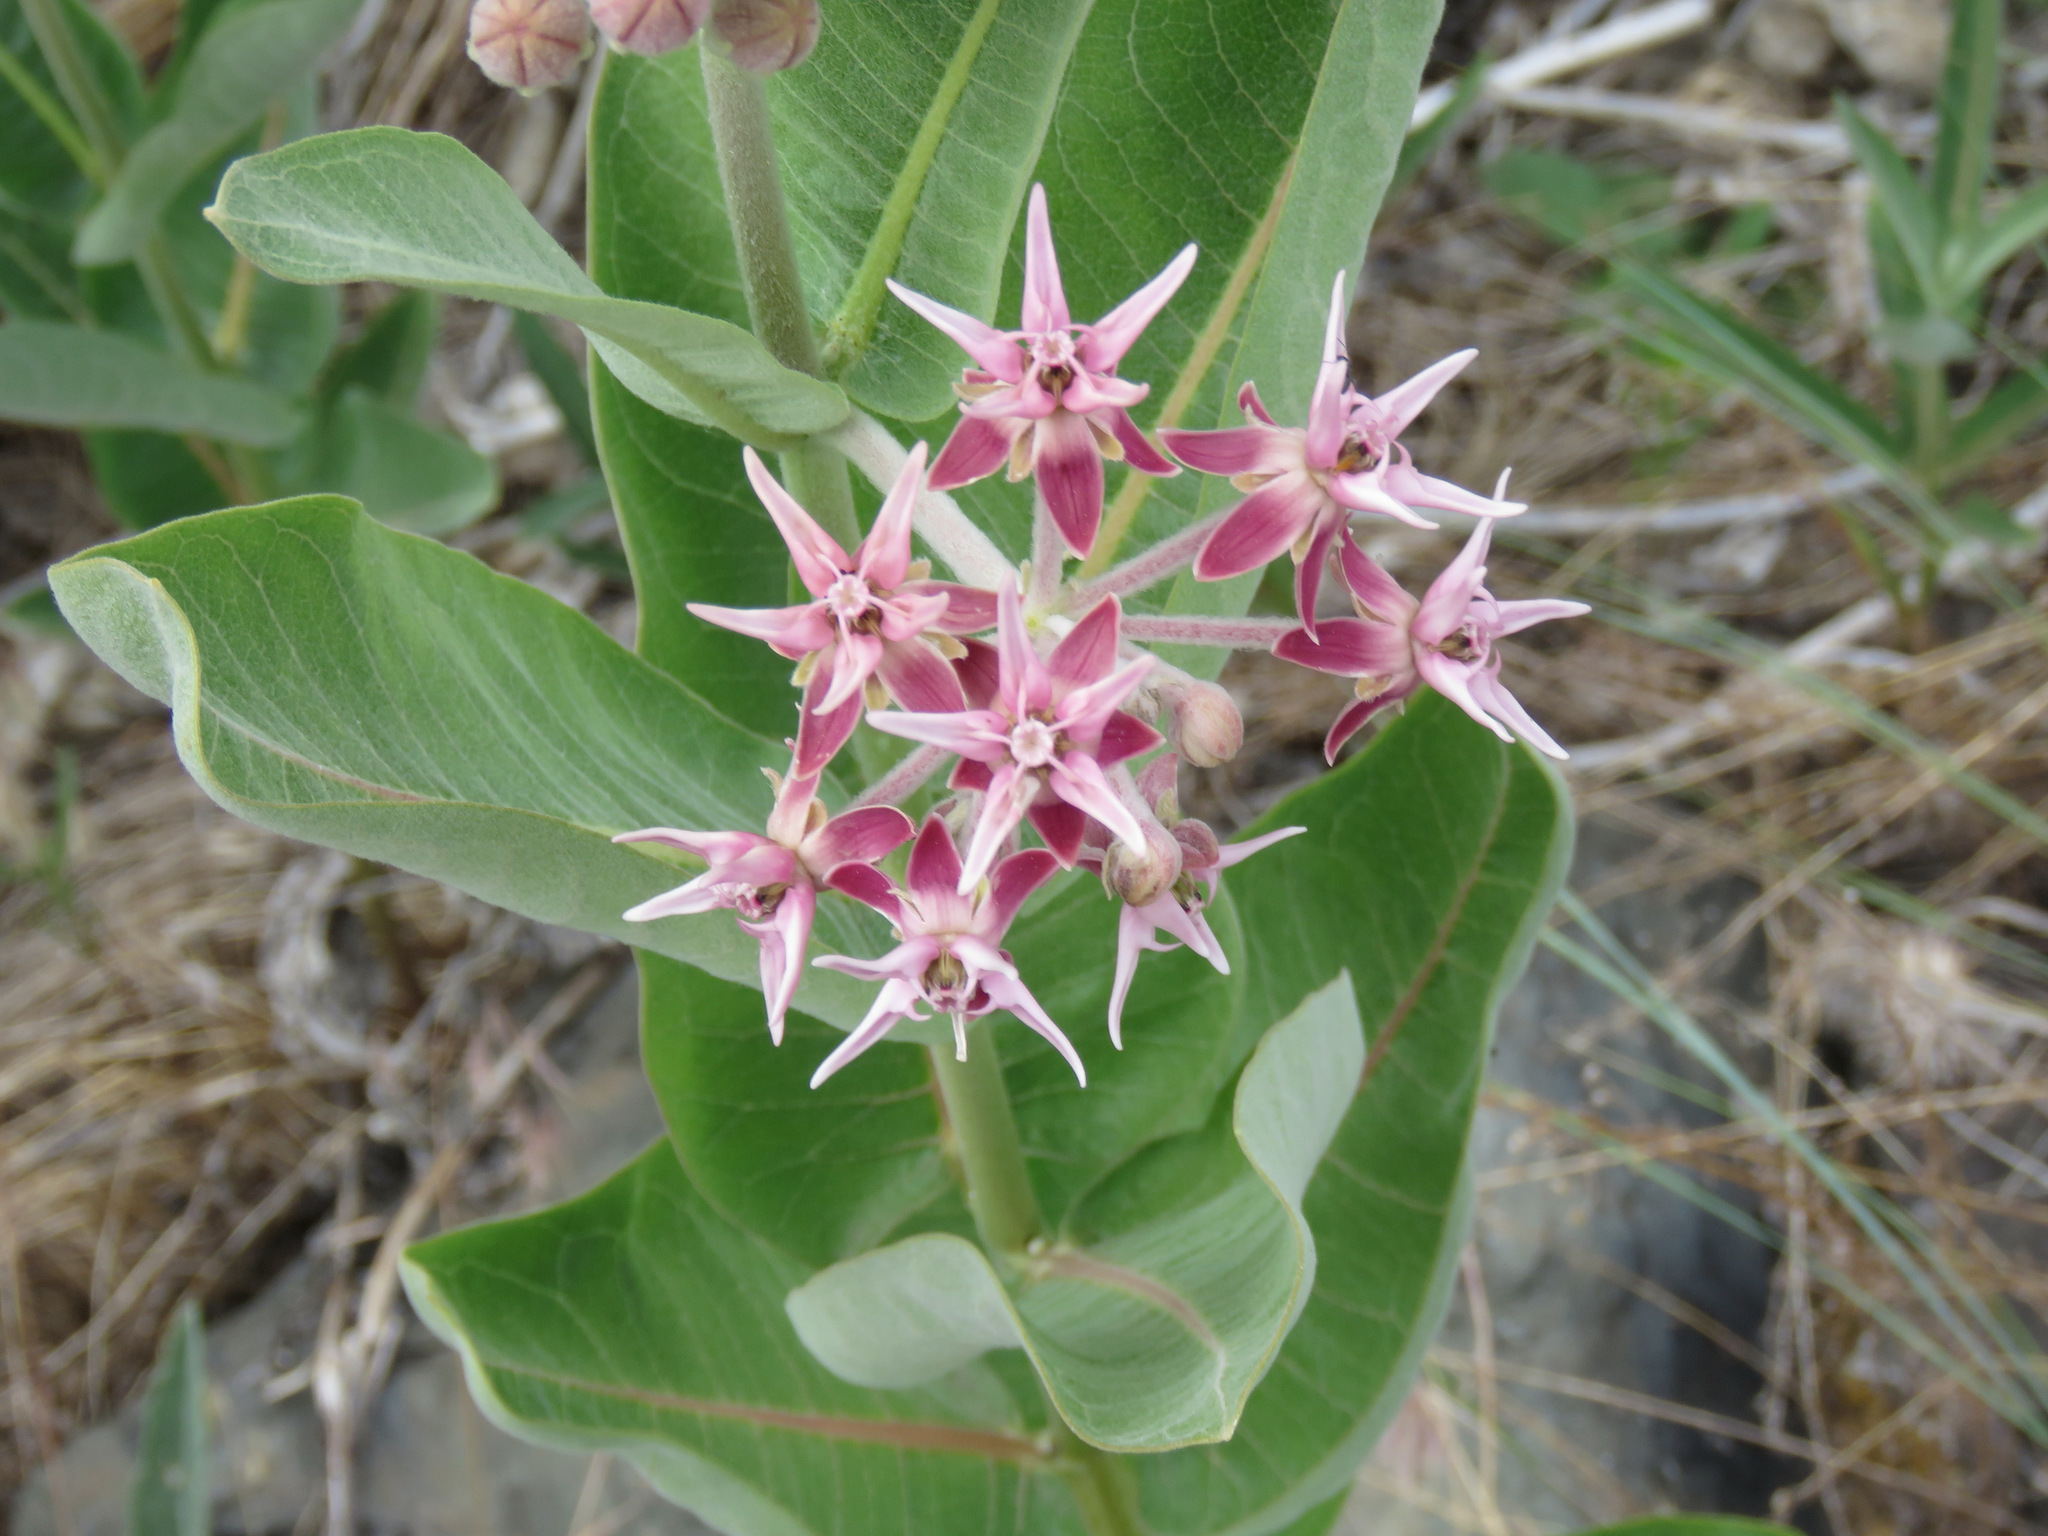 a clump of light pink star-shaped showy milkweed flowers surrounded by large green leaves with an orange central vein